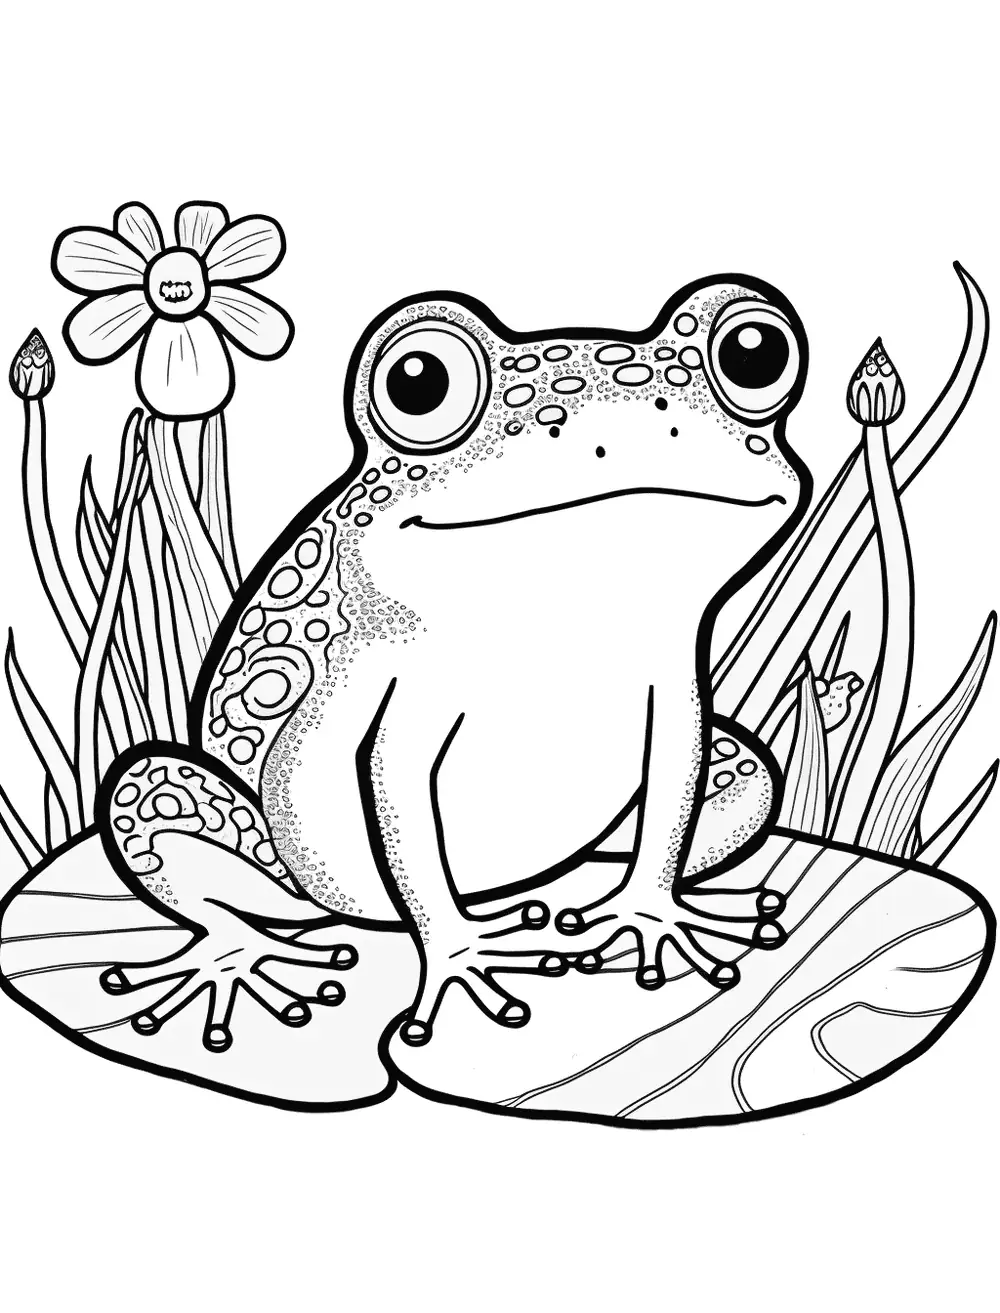 Frog and Caterpillar Coloring Page - A frog and a caterpillar, with the caterpillar crawling on the frog’s back.